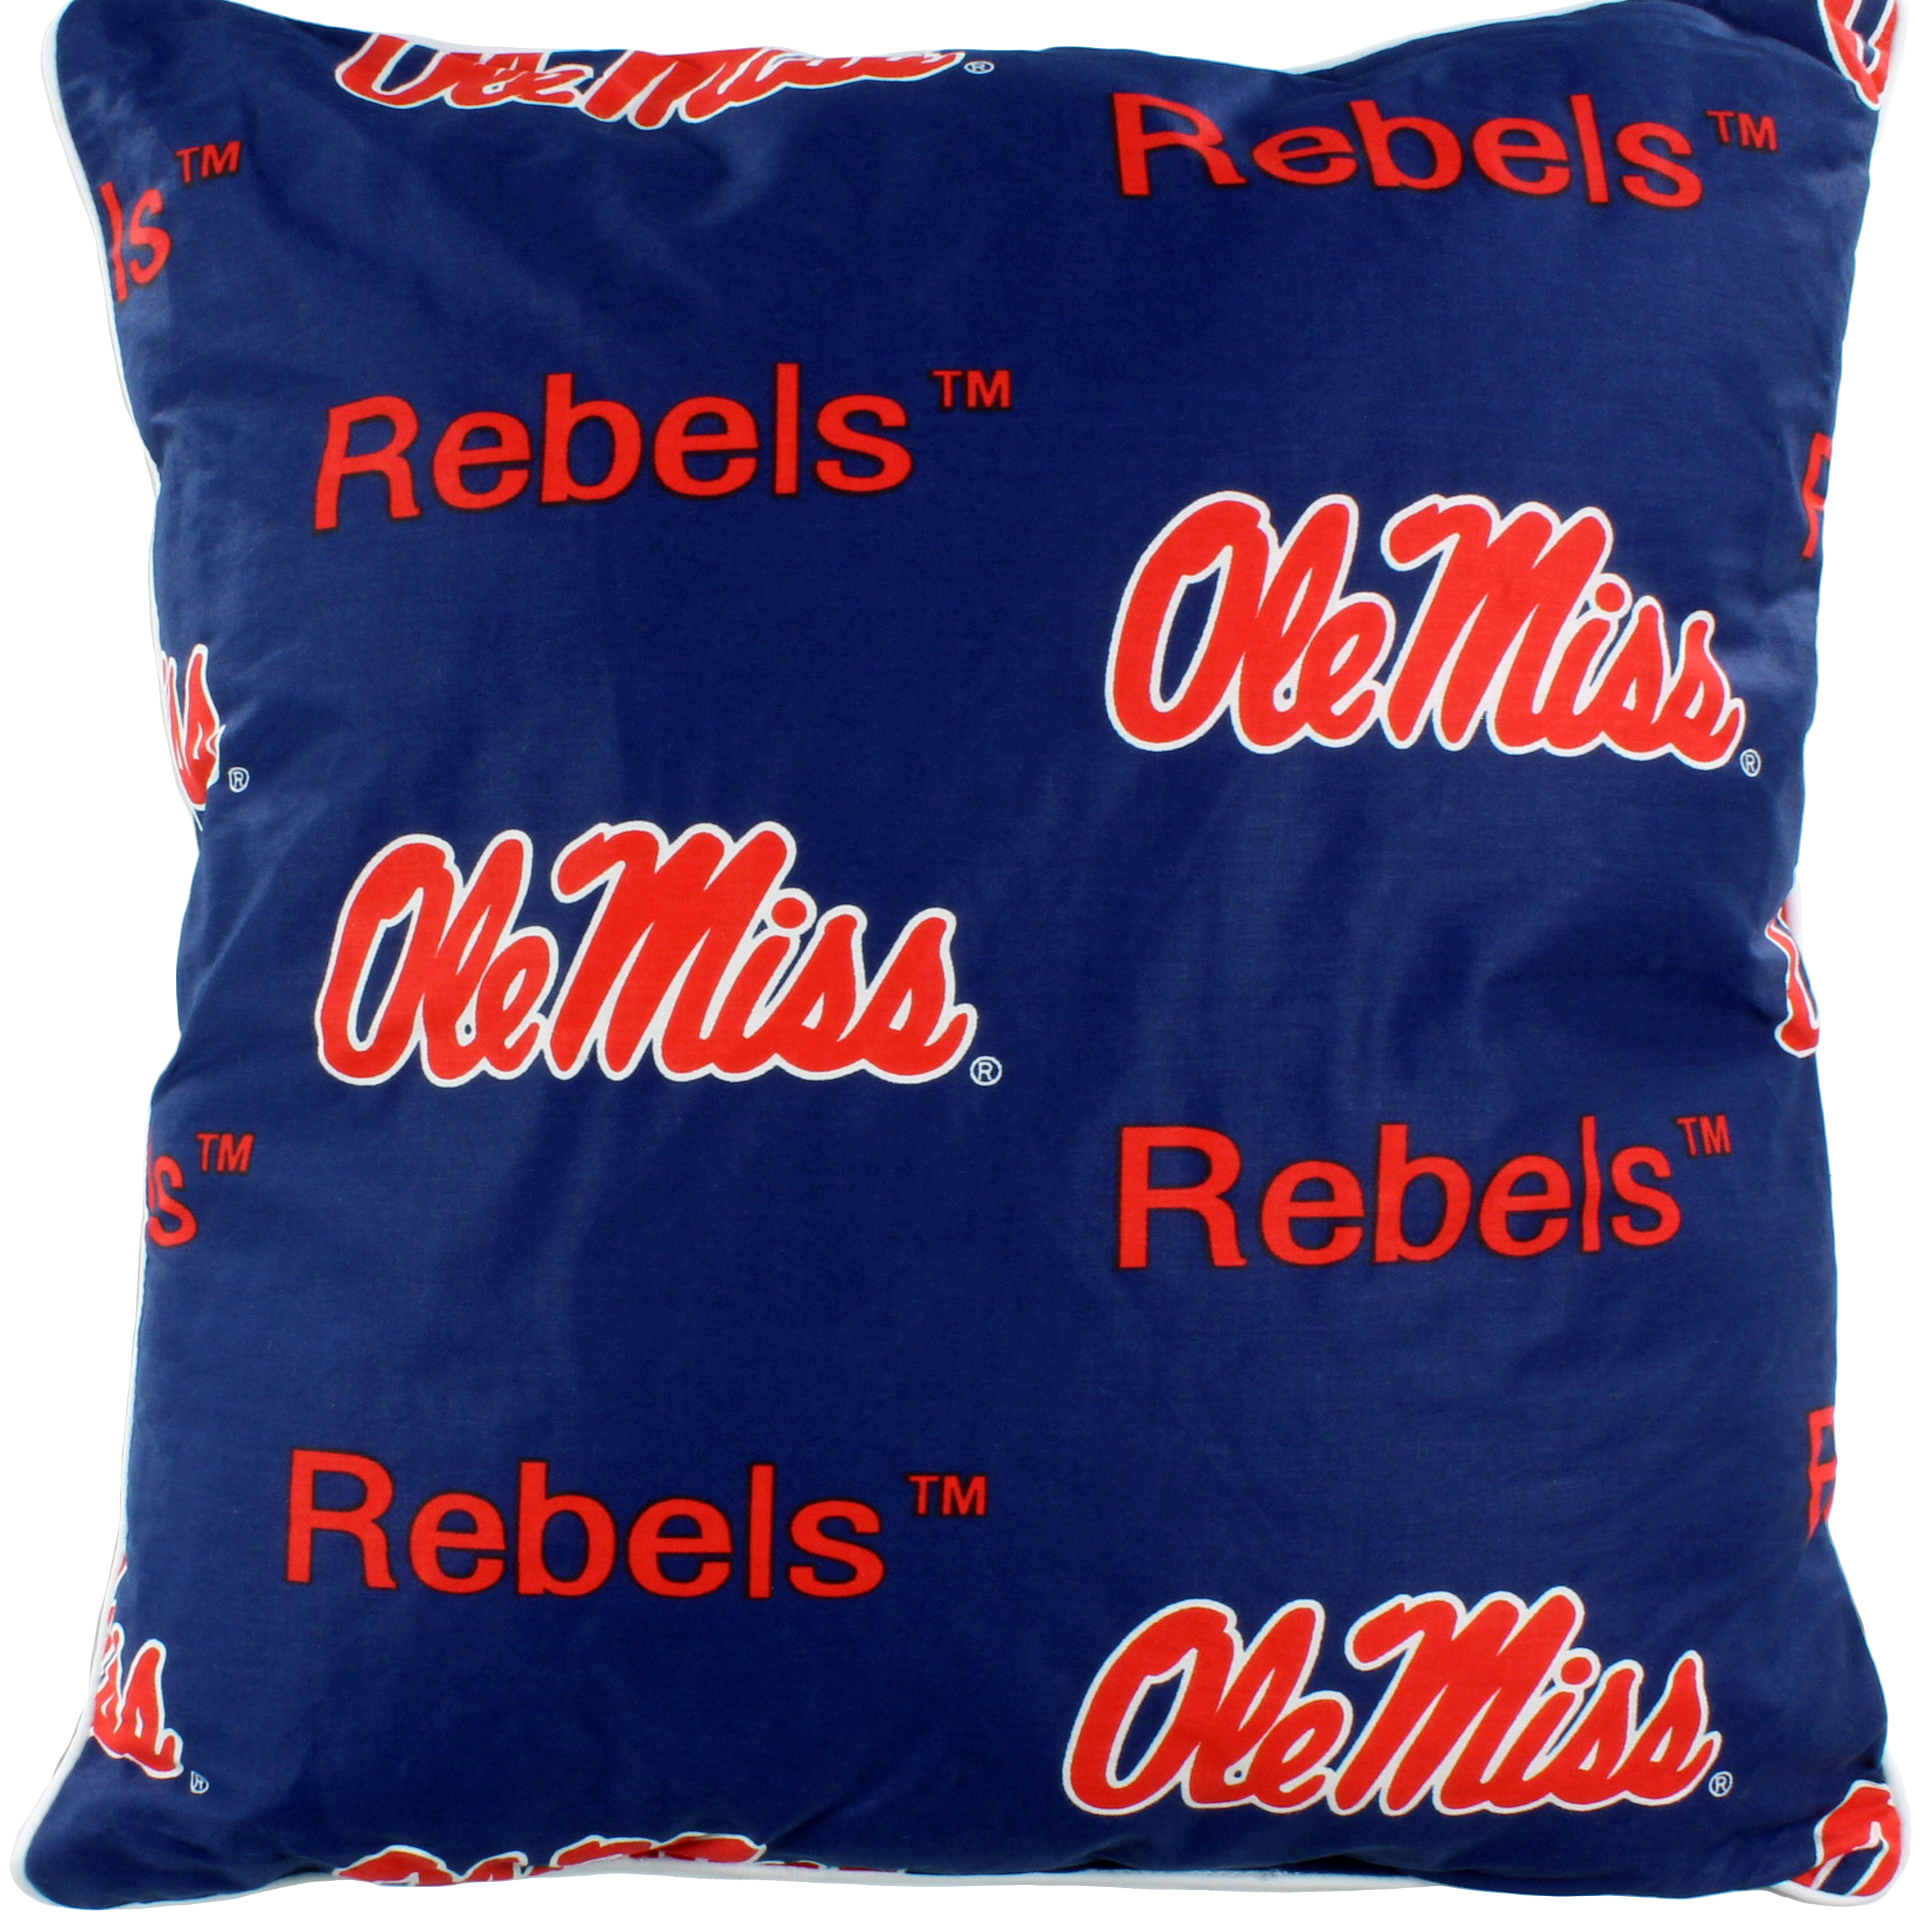 Mississippi Rebels 16" x 16" Decorative Pillow - (Includes 2 Decorative Pillows) - image 2 of 8